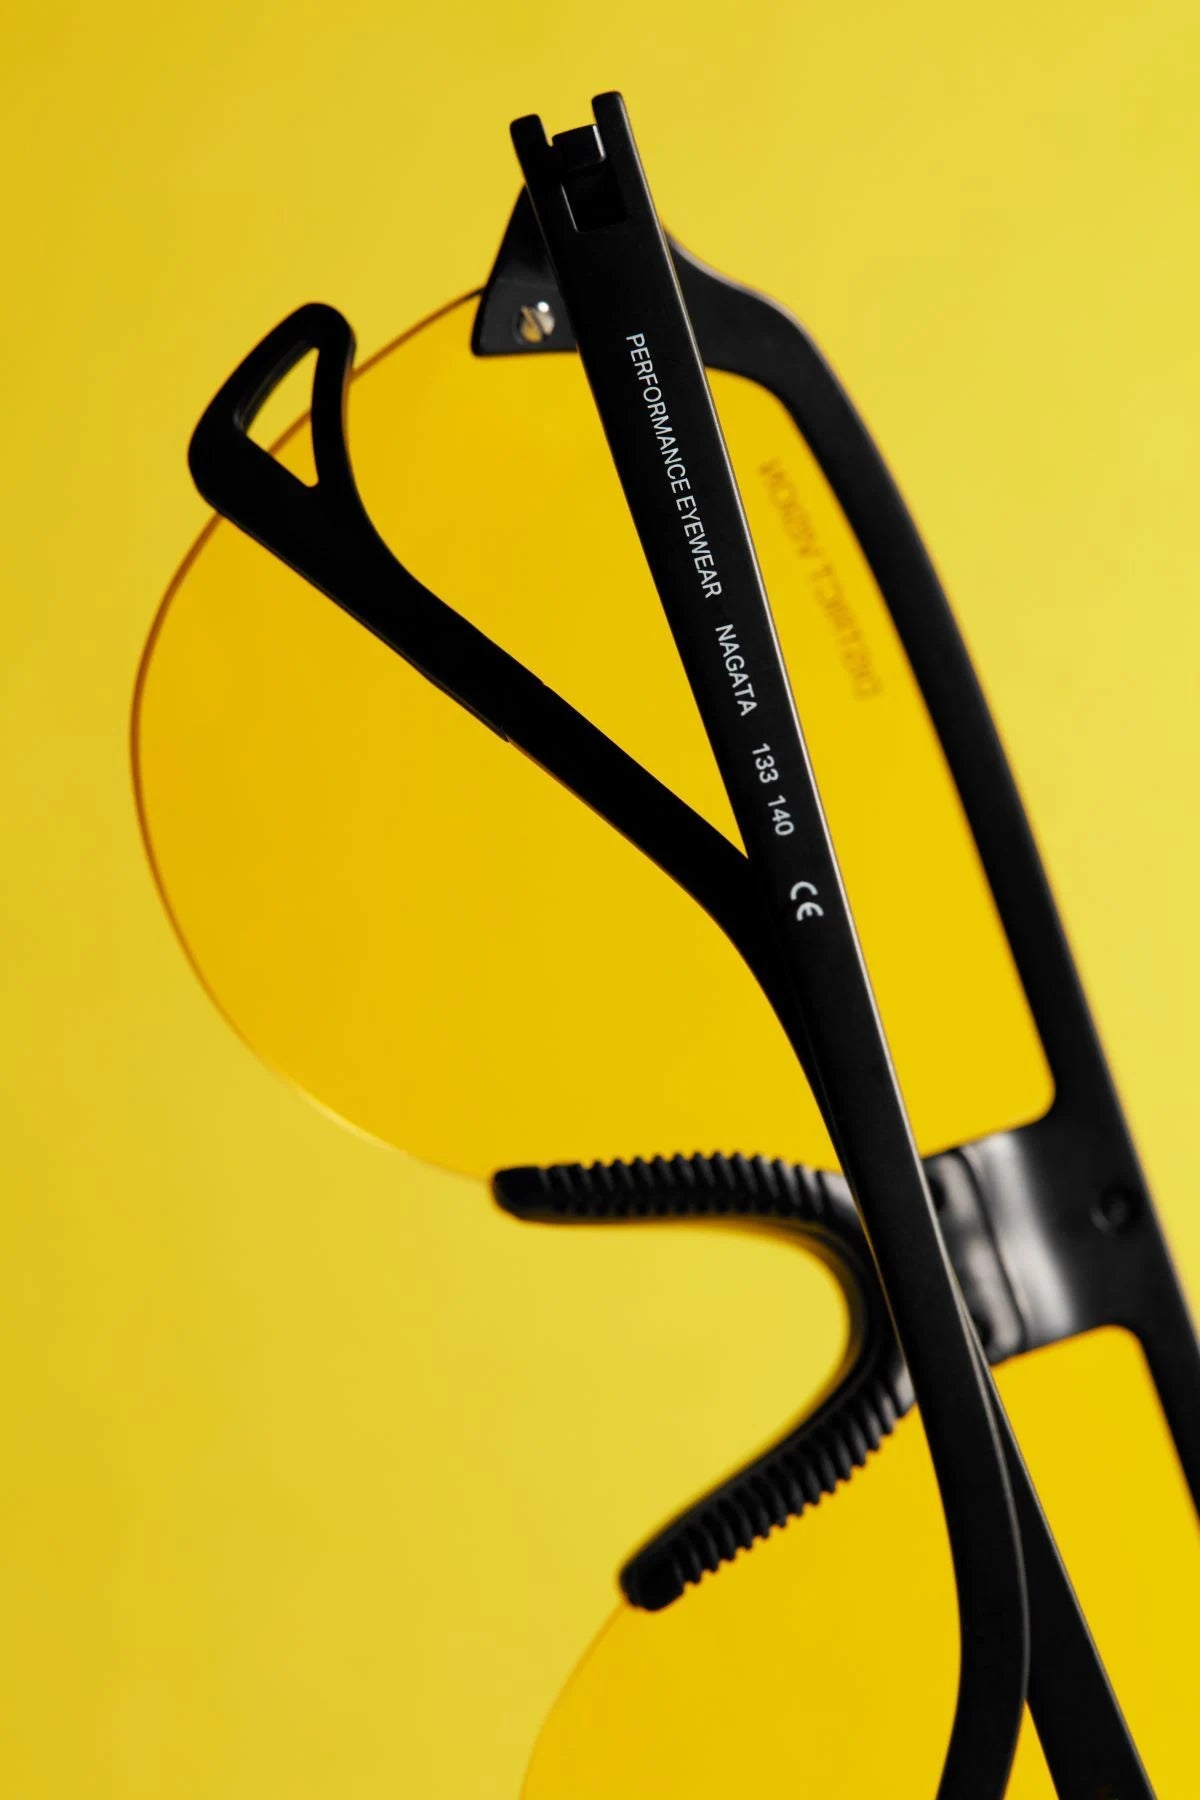 District Vision Nagata Speed Blade Sunglasses in Black/Yellow Lens